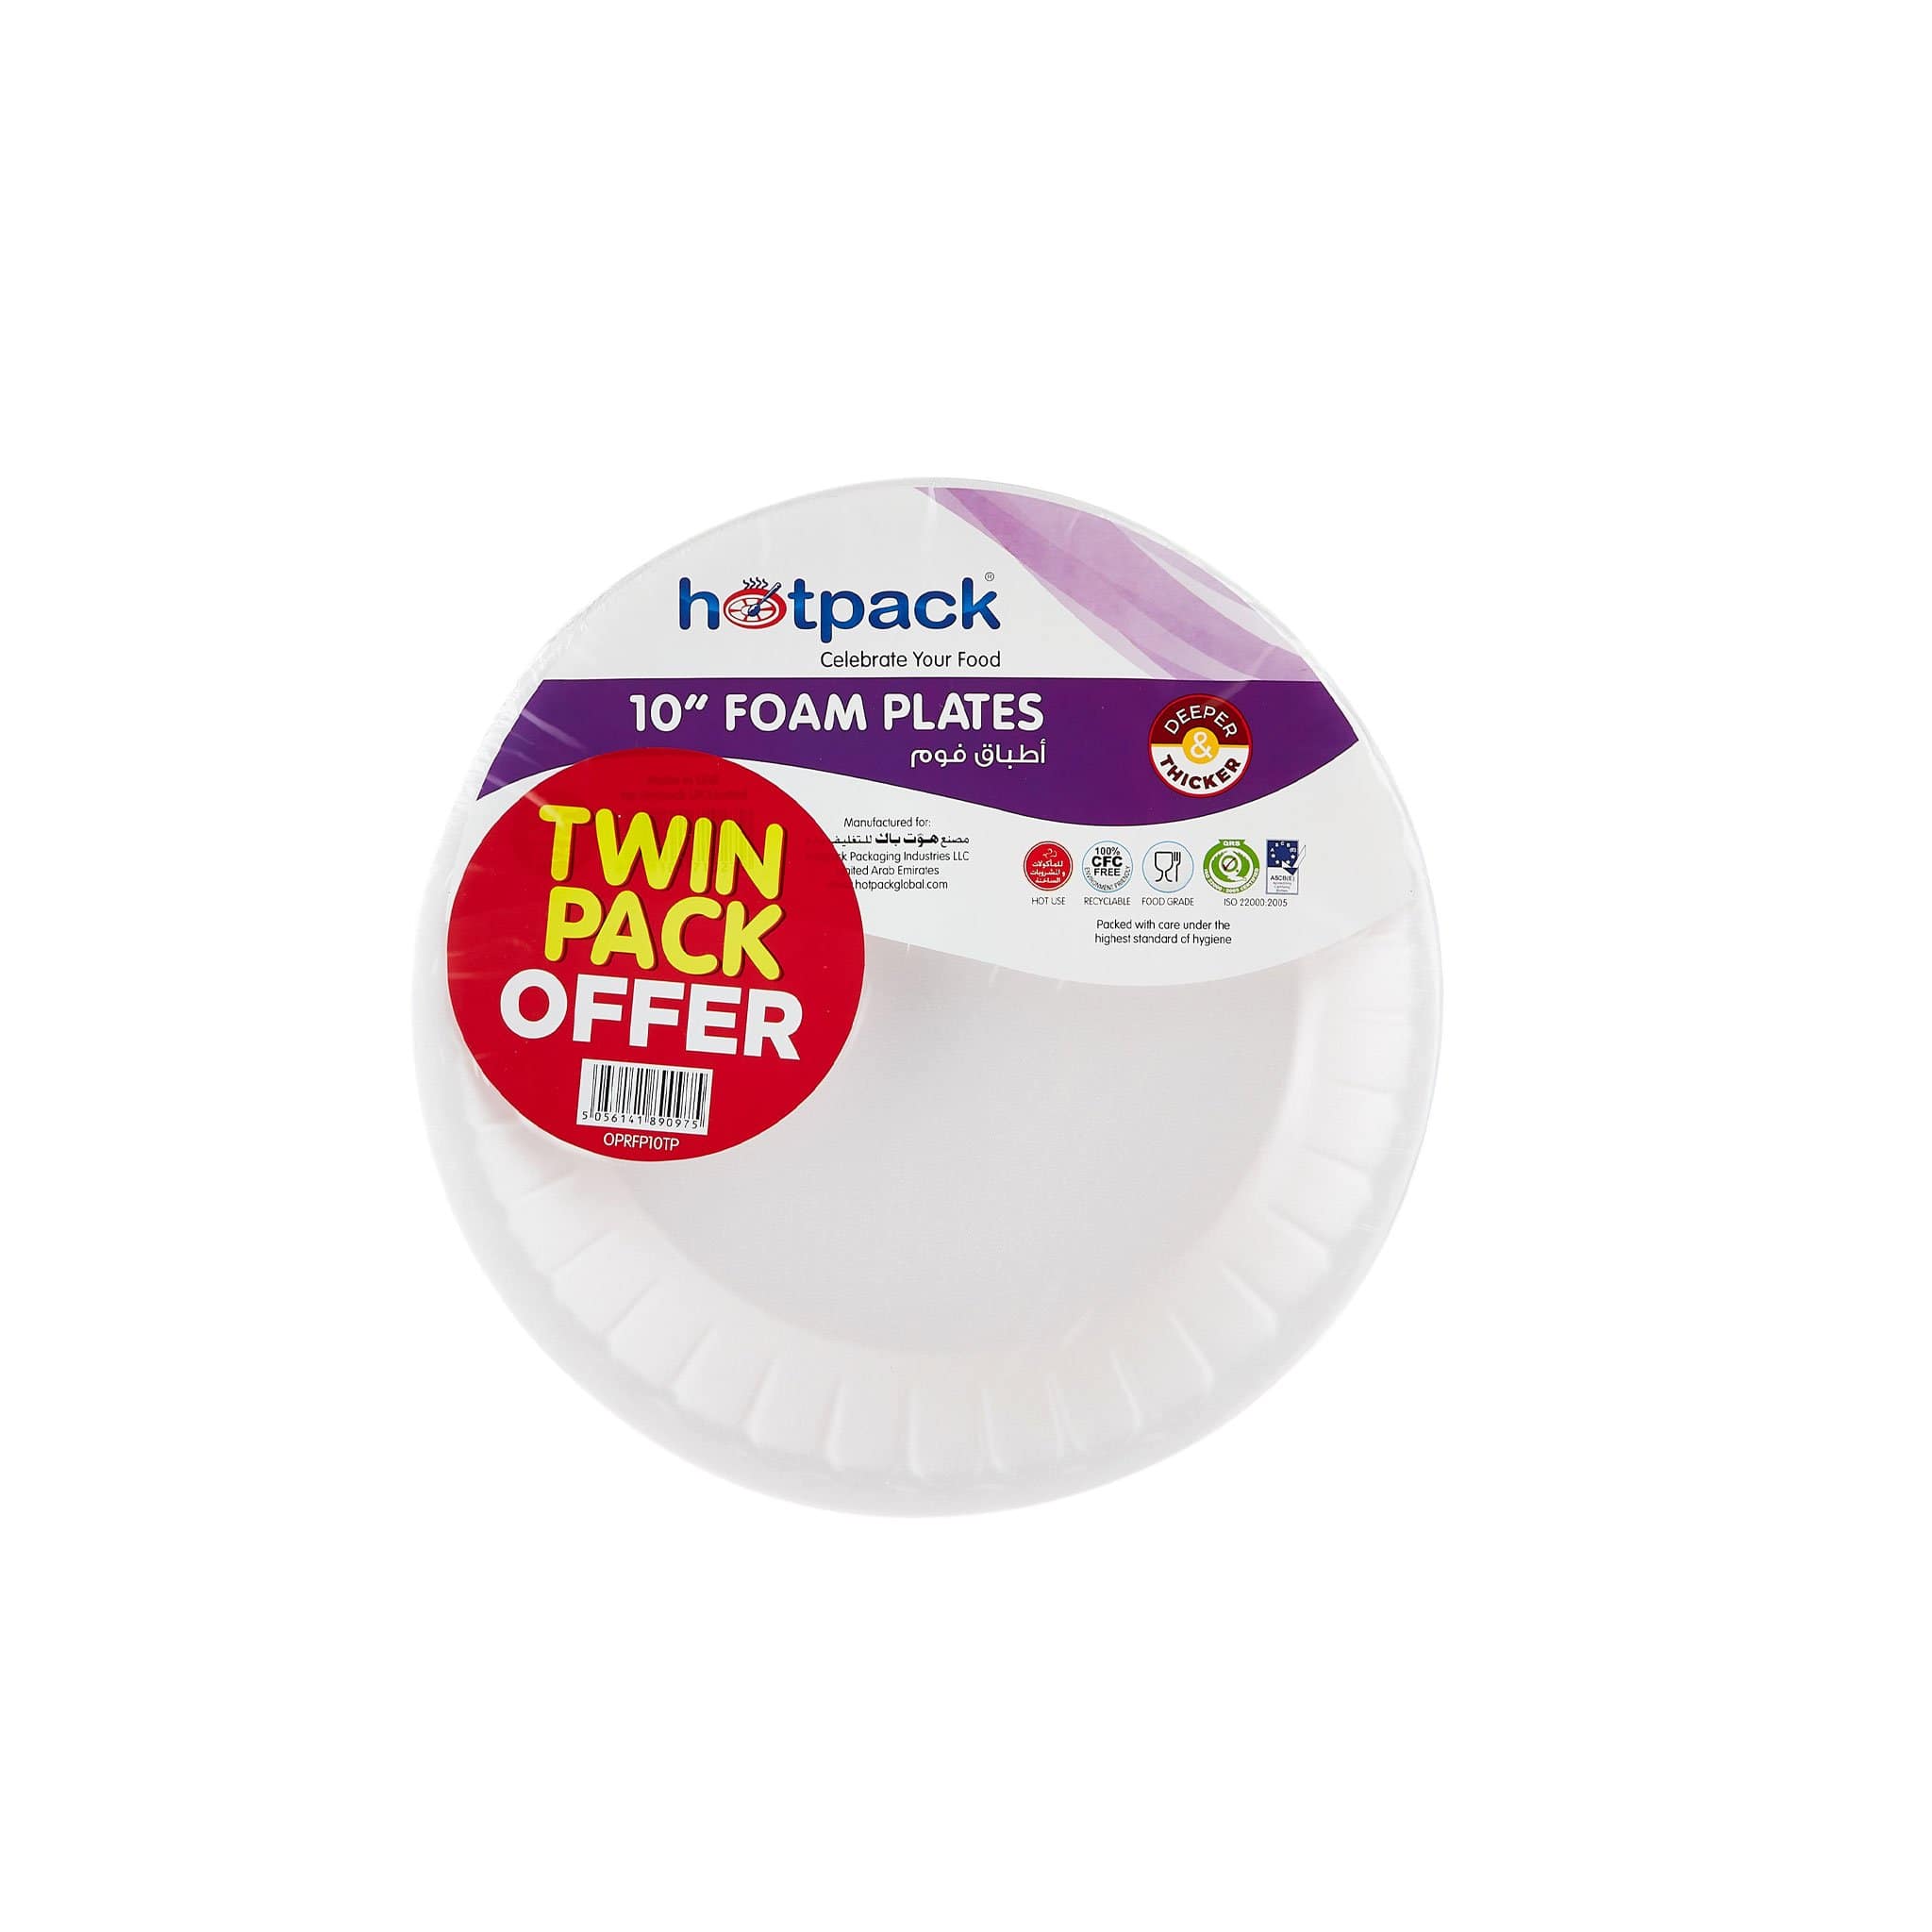 Round Foam Plate 10 Inch Buy One Get One Free 25 Pieces x 2 Packets - Hotpack Global